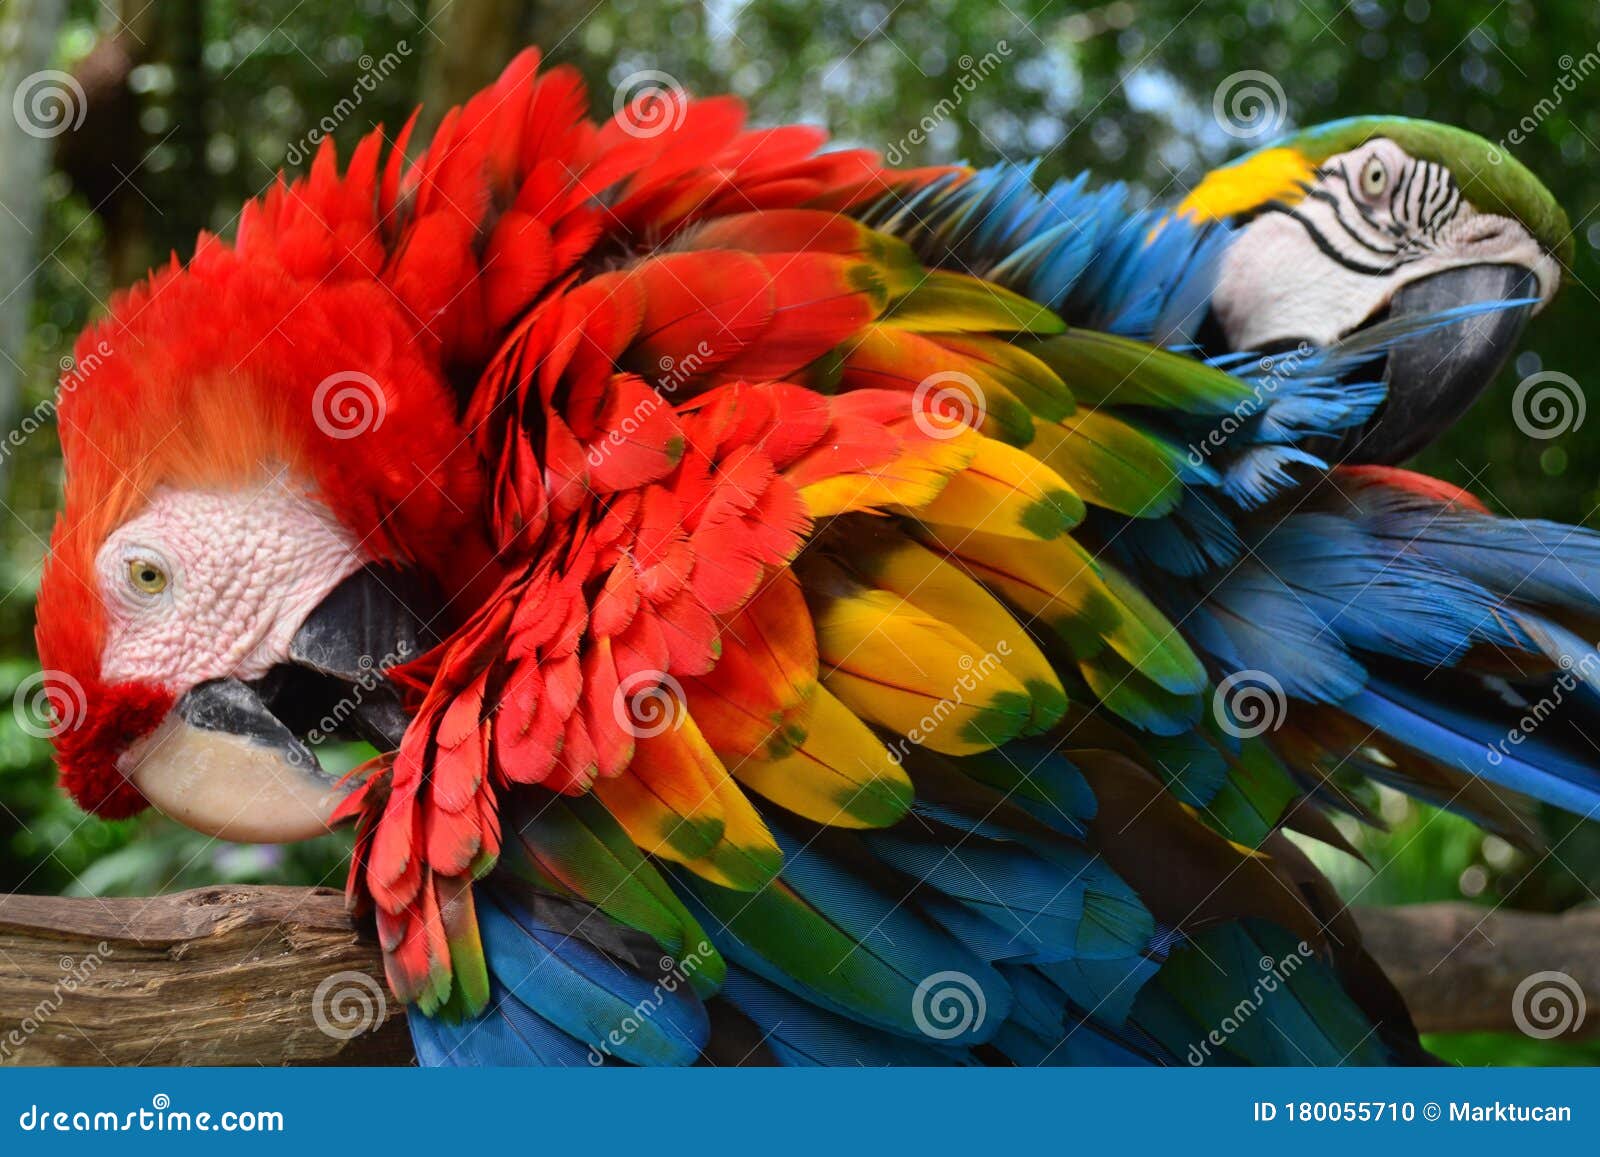 6 677 Macaw Amazon Photos Free Royalty Free Stock Photos From Dreamstime